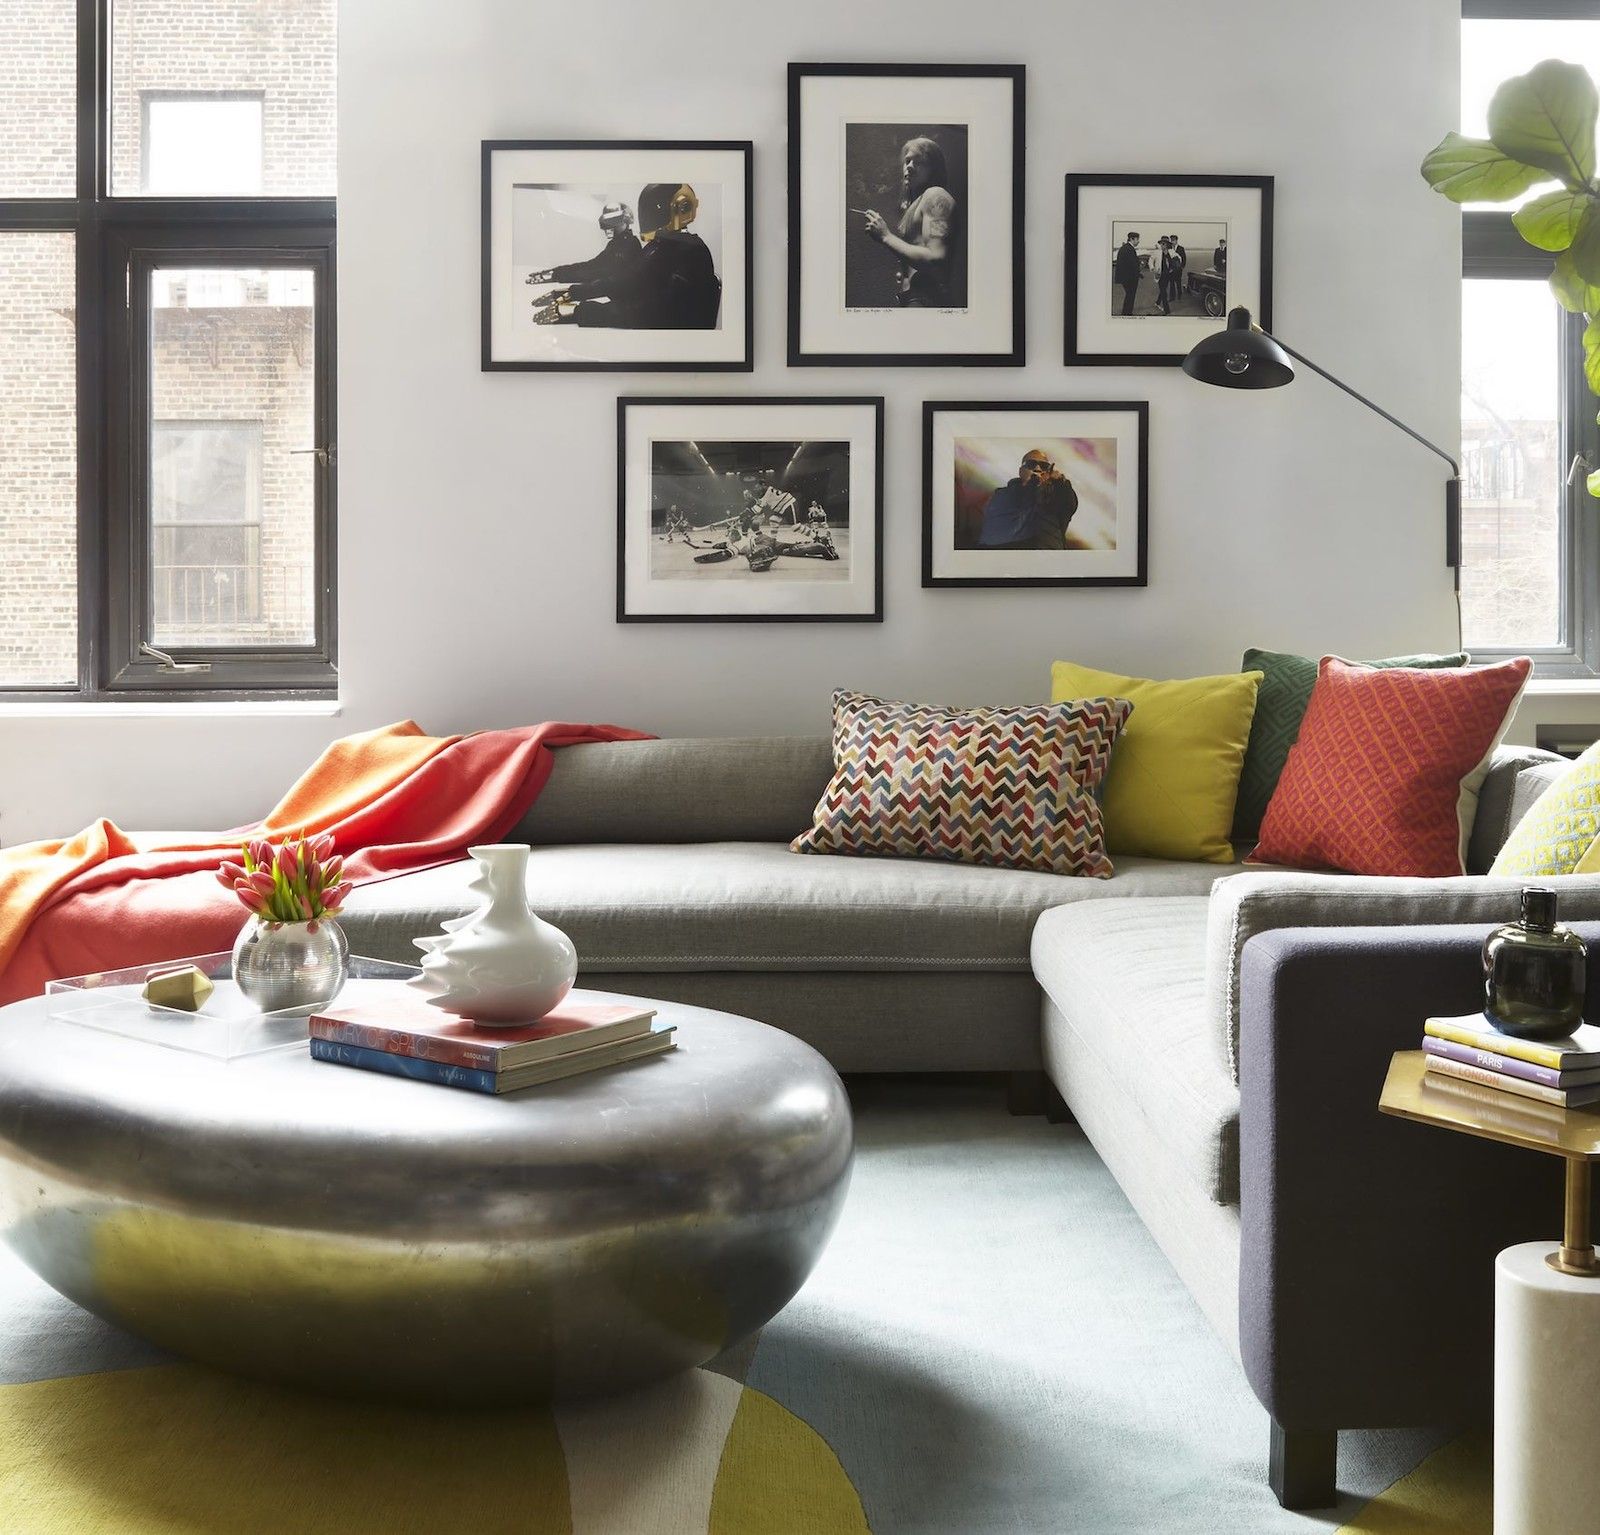 15 Ways To Style A Grey Sofa In Your Home – Décor Aid Regarding Sofas In Dark Grey (View 16 of 20)